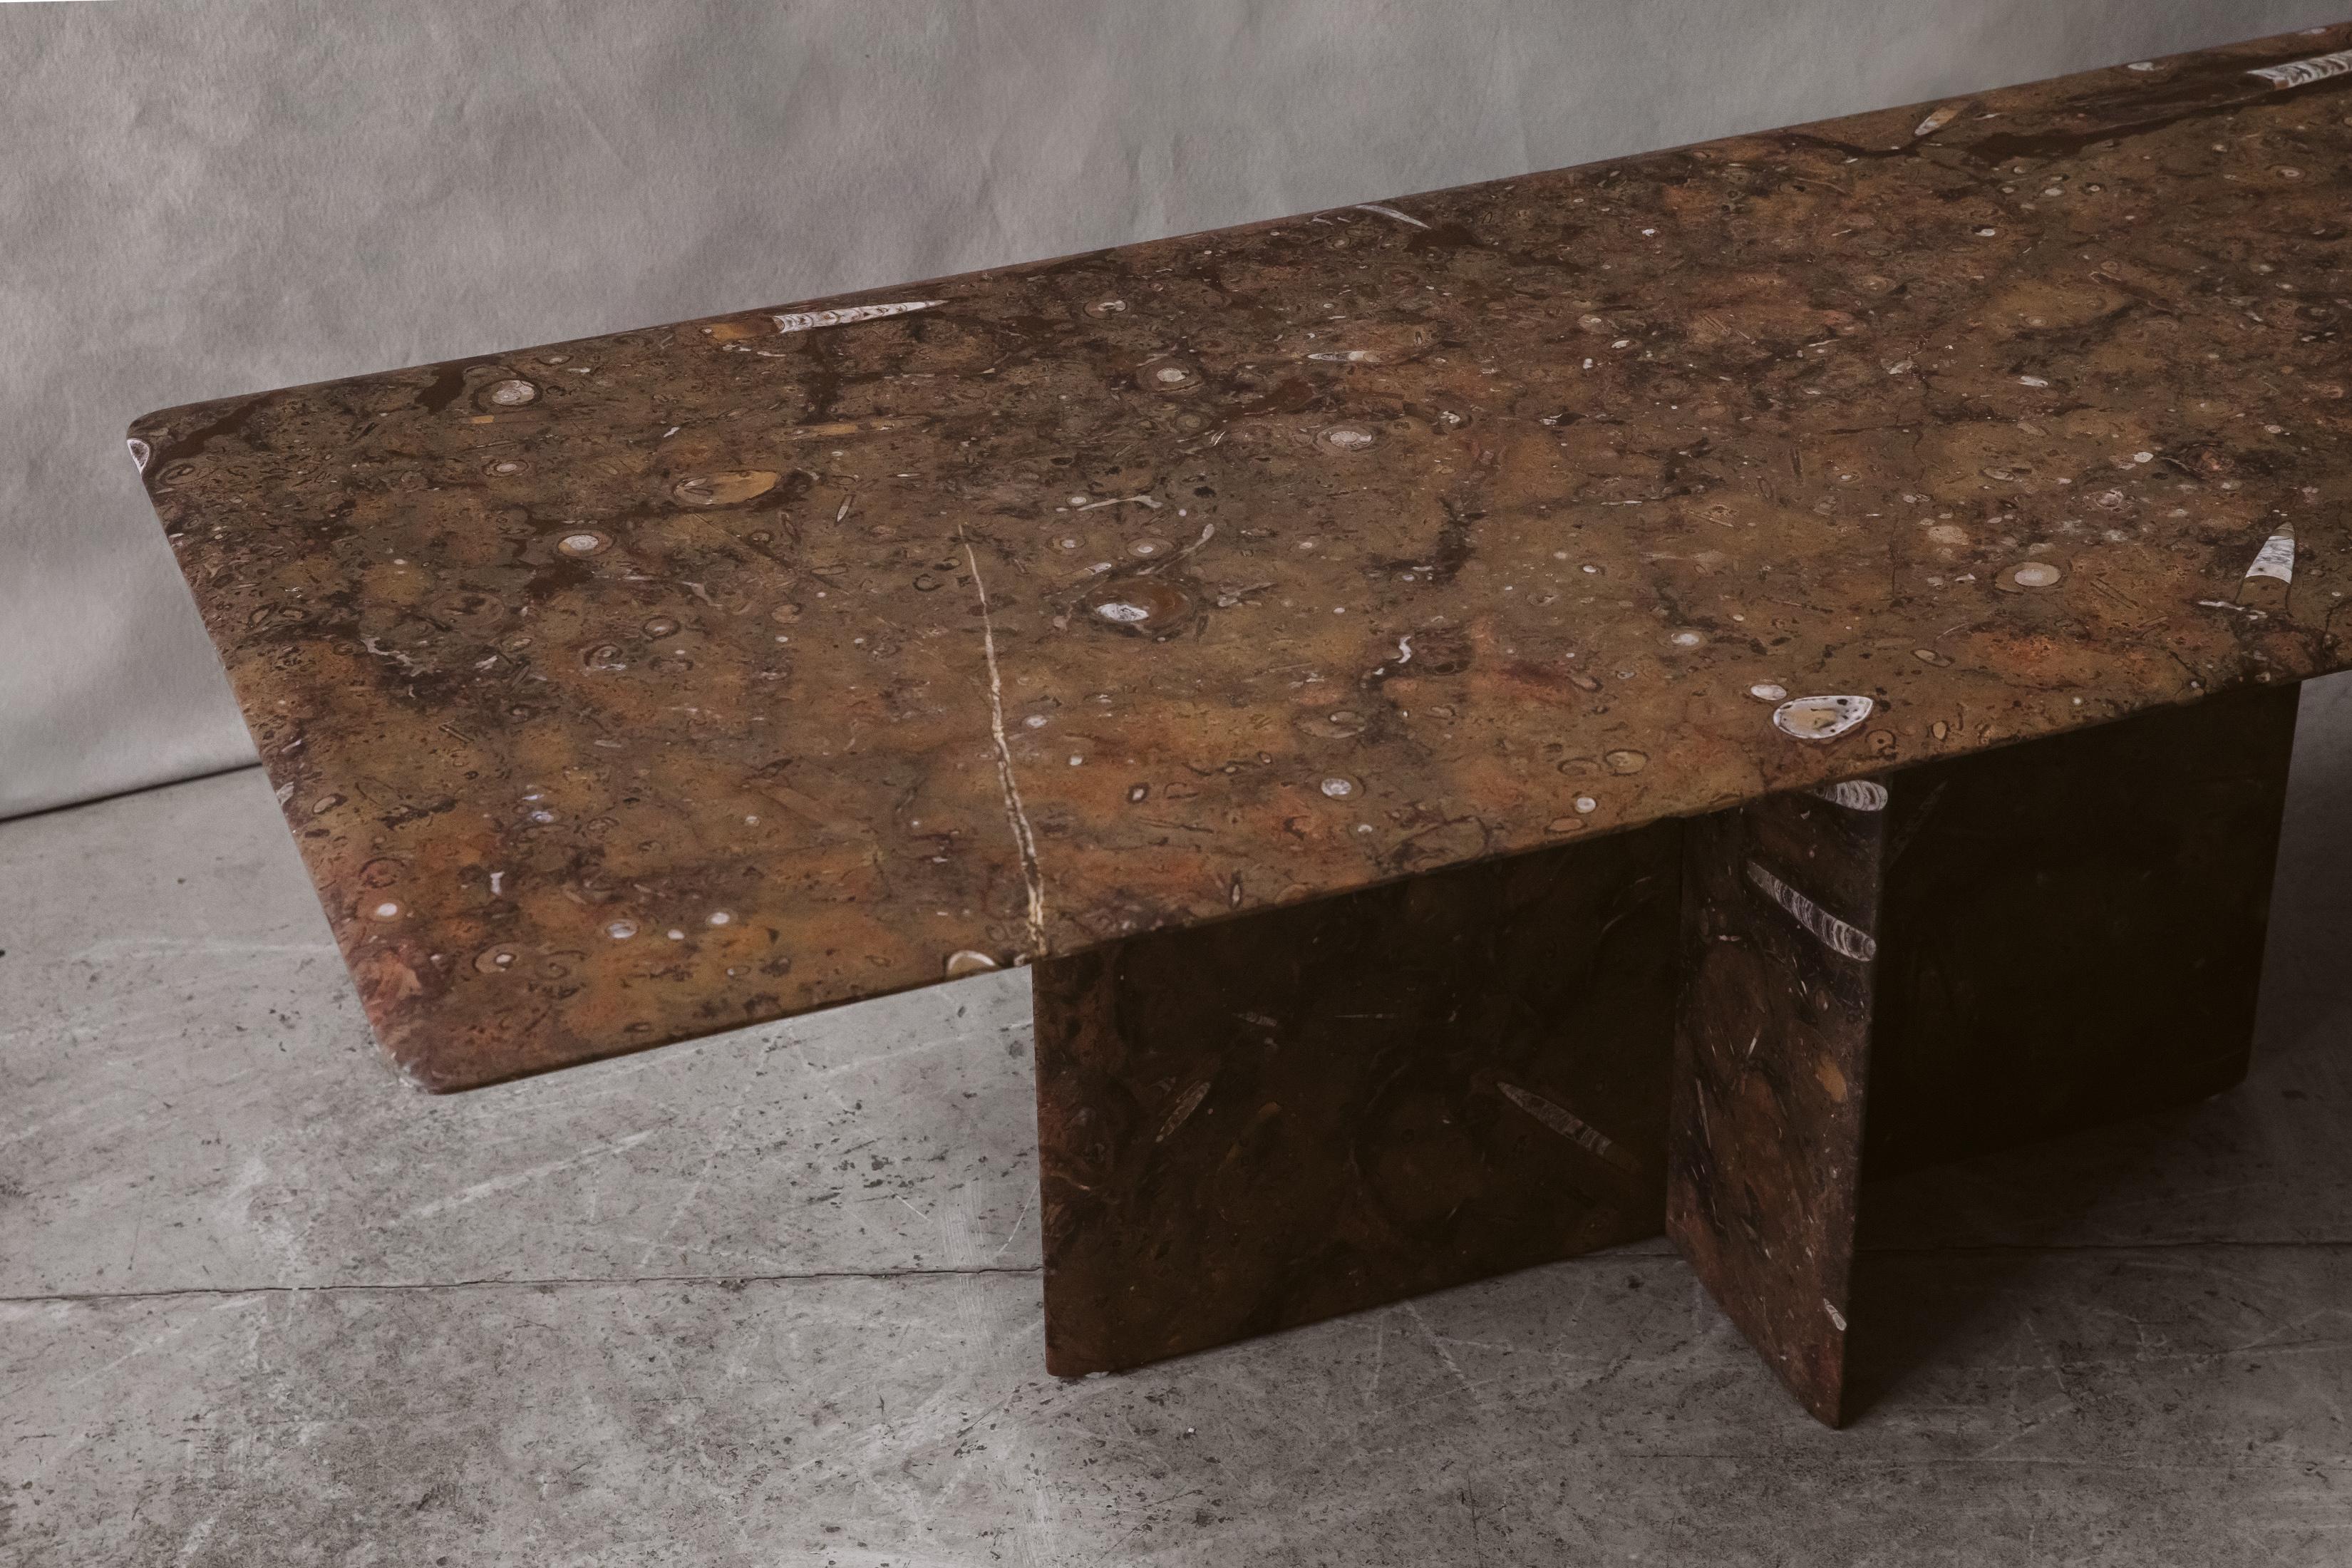 European Vintage Fossilized Stone Coffee Table, From Italy, Circa 1970